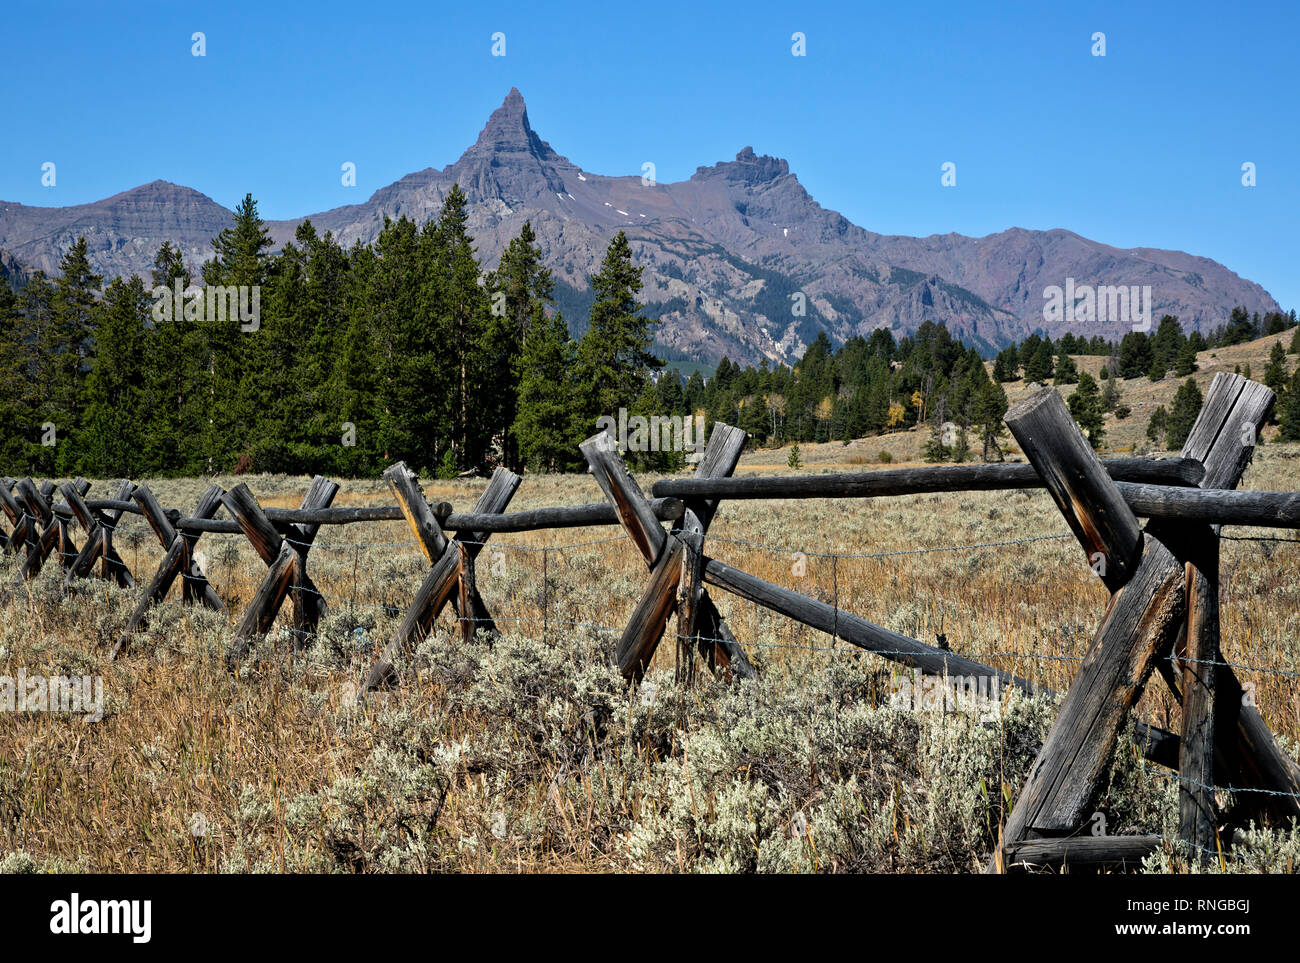 WY03785-00...WYOMING - Traditional pole fence line along the Beartooth Scenic Byway with Pilot Peak in the distance in the Shoshone National Forest. Stock Photo